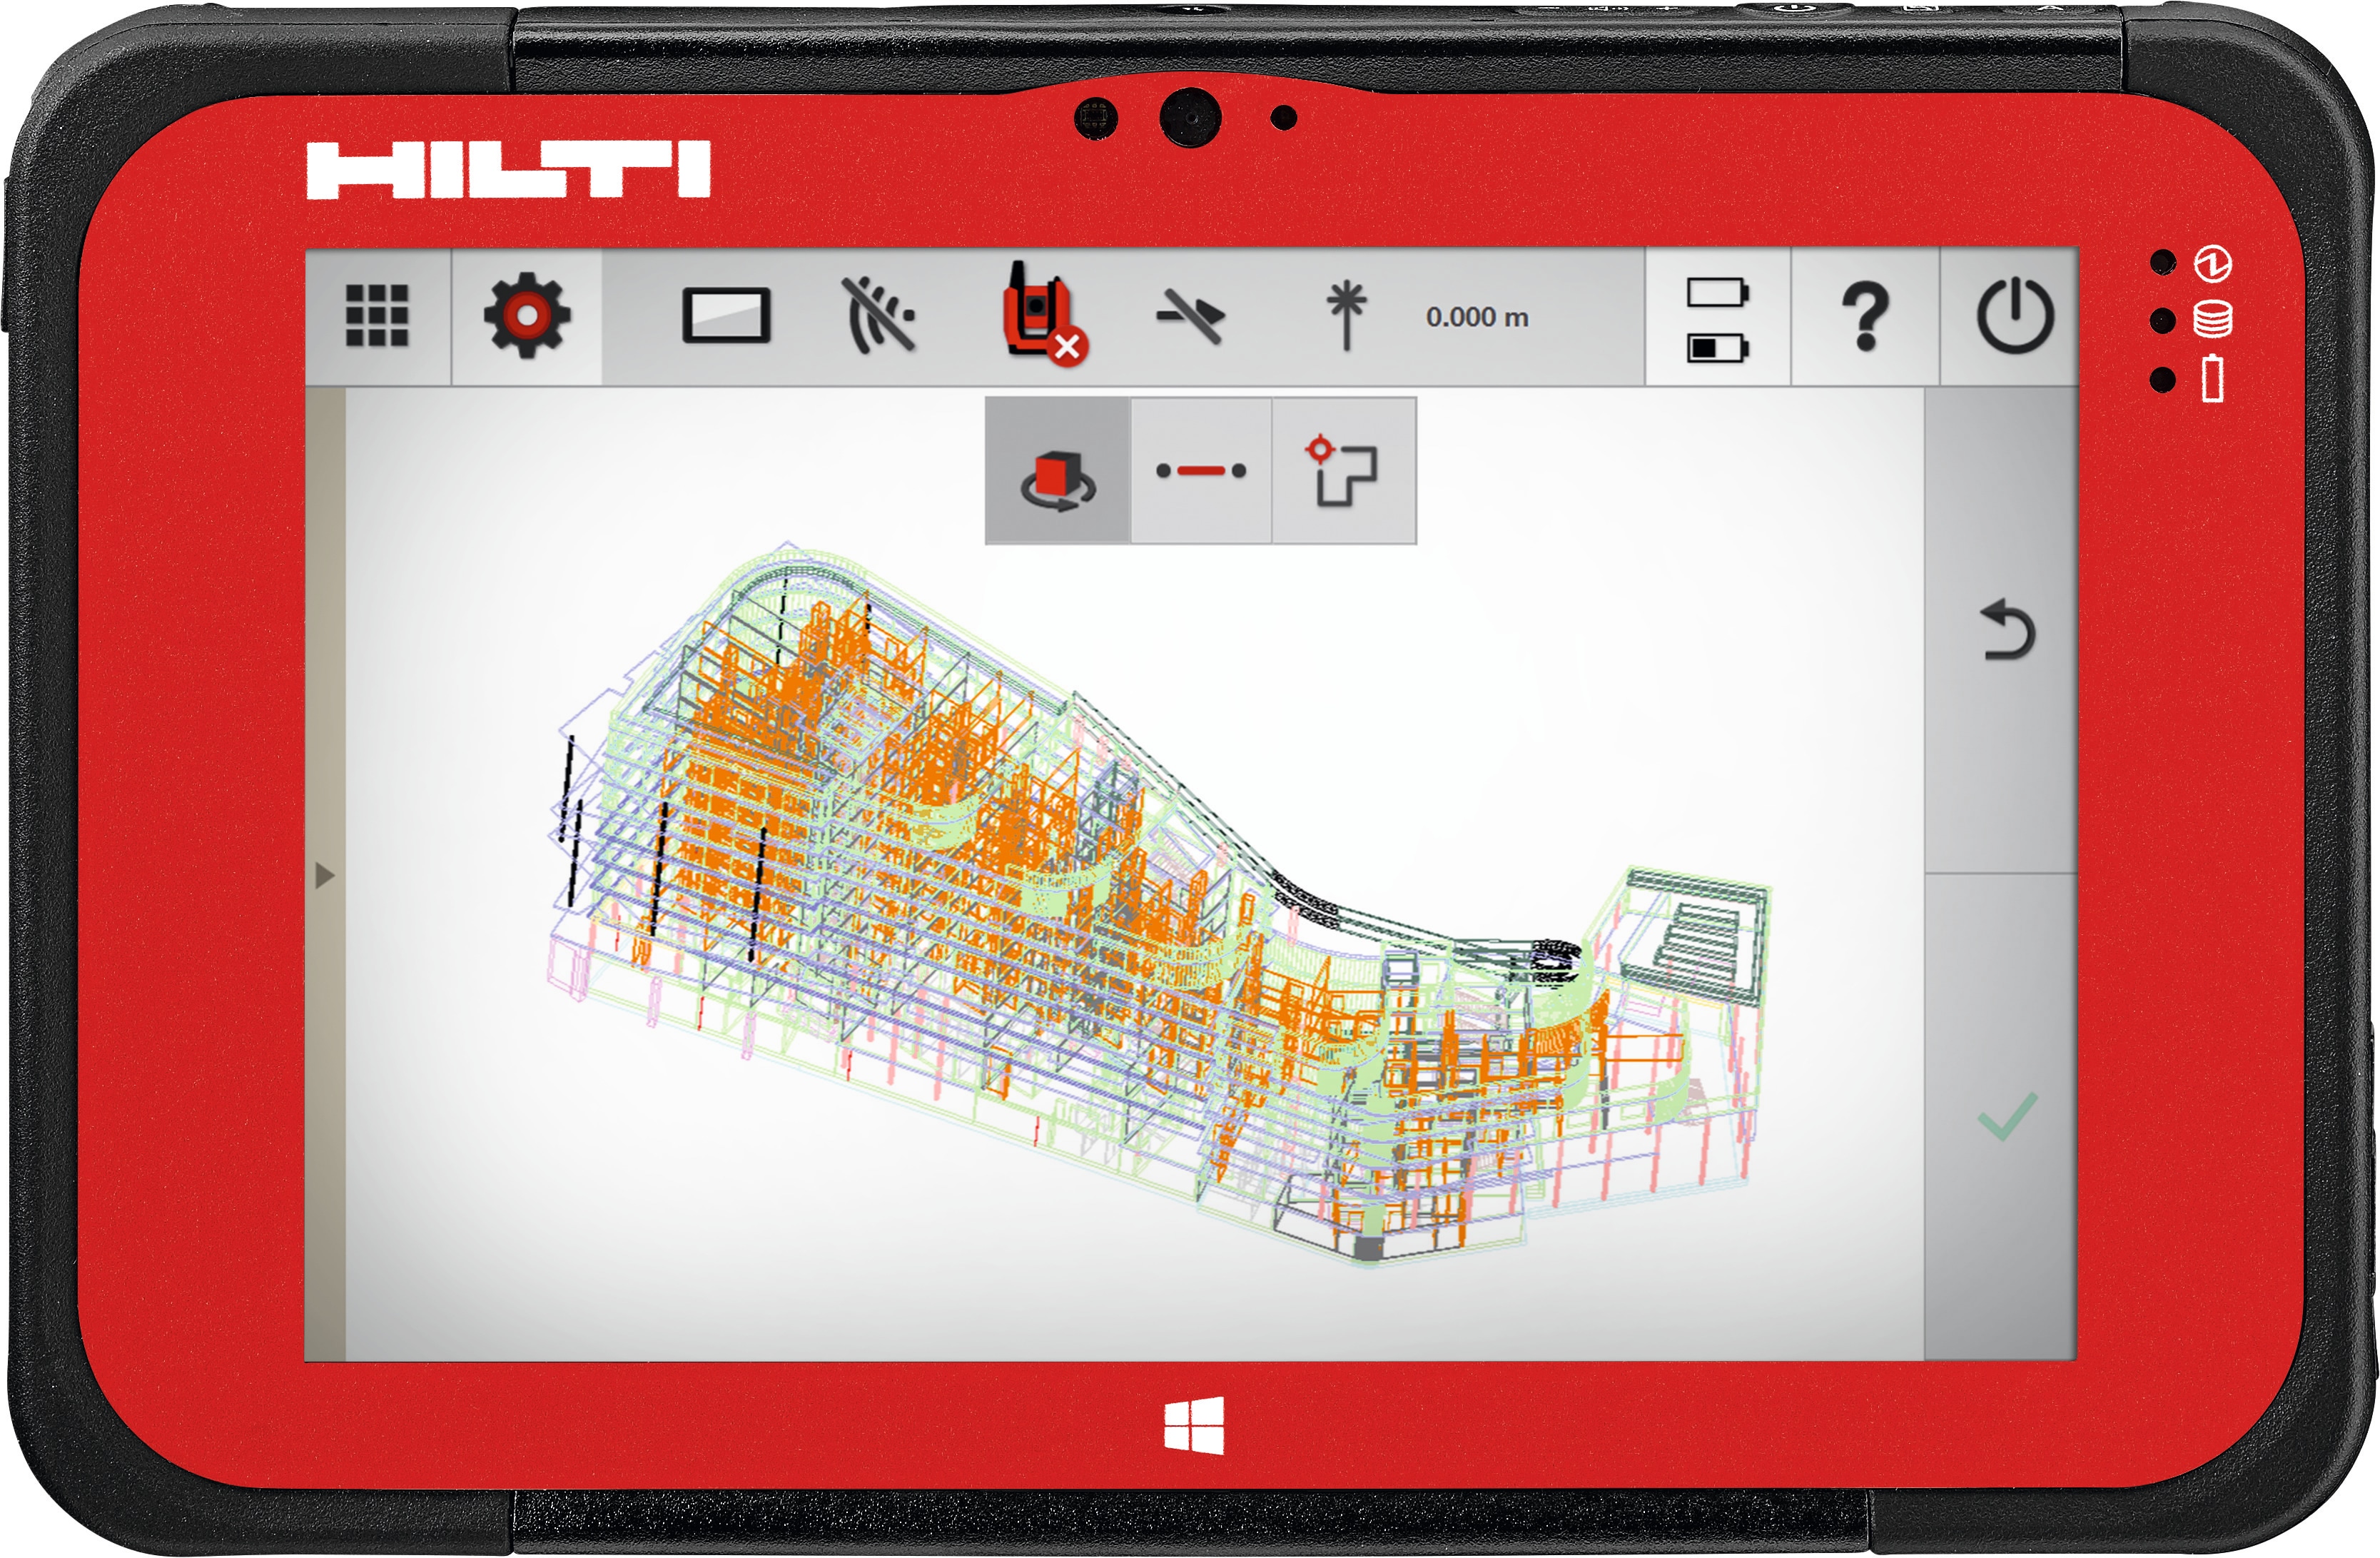 Hilti construction layout software